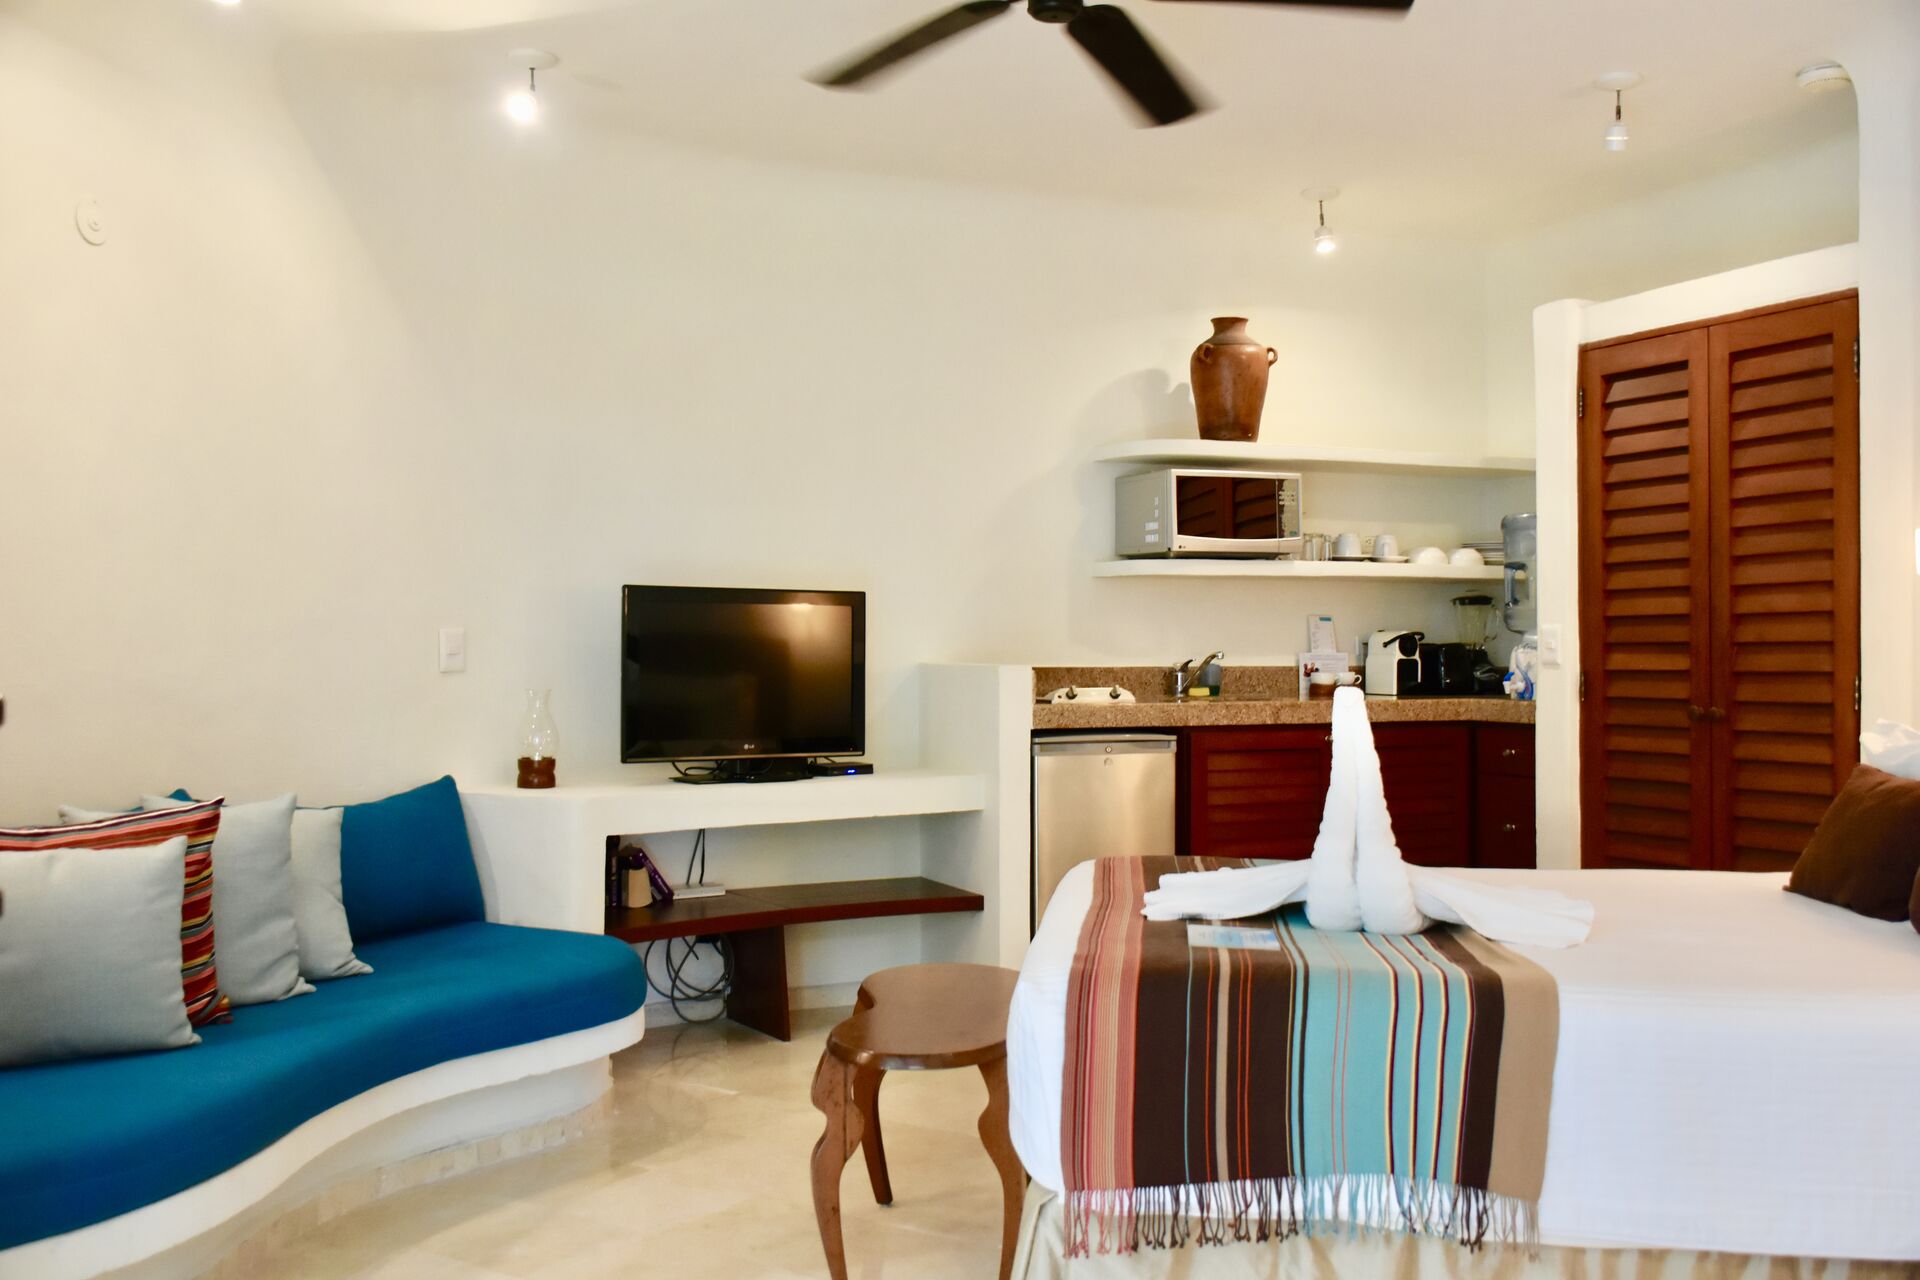 Fully furnished ocean view suite with queen size bed and kitchenette.v